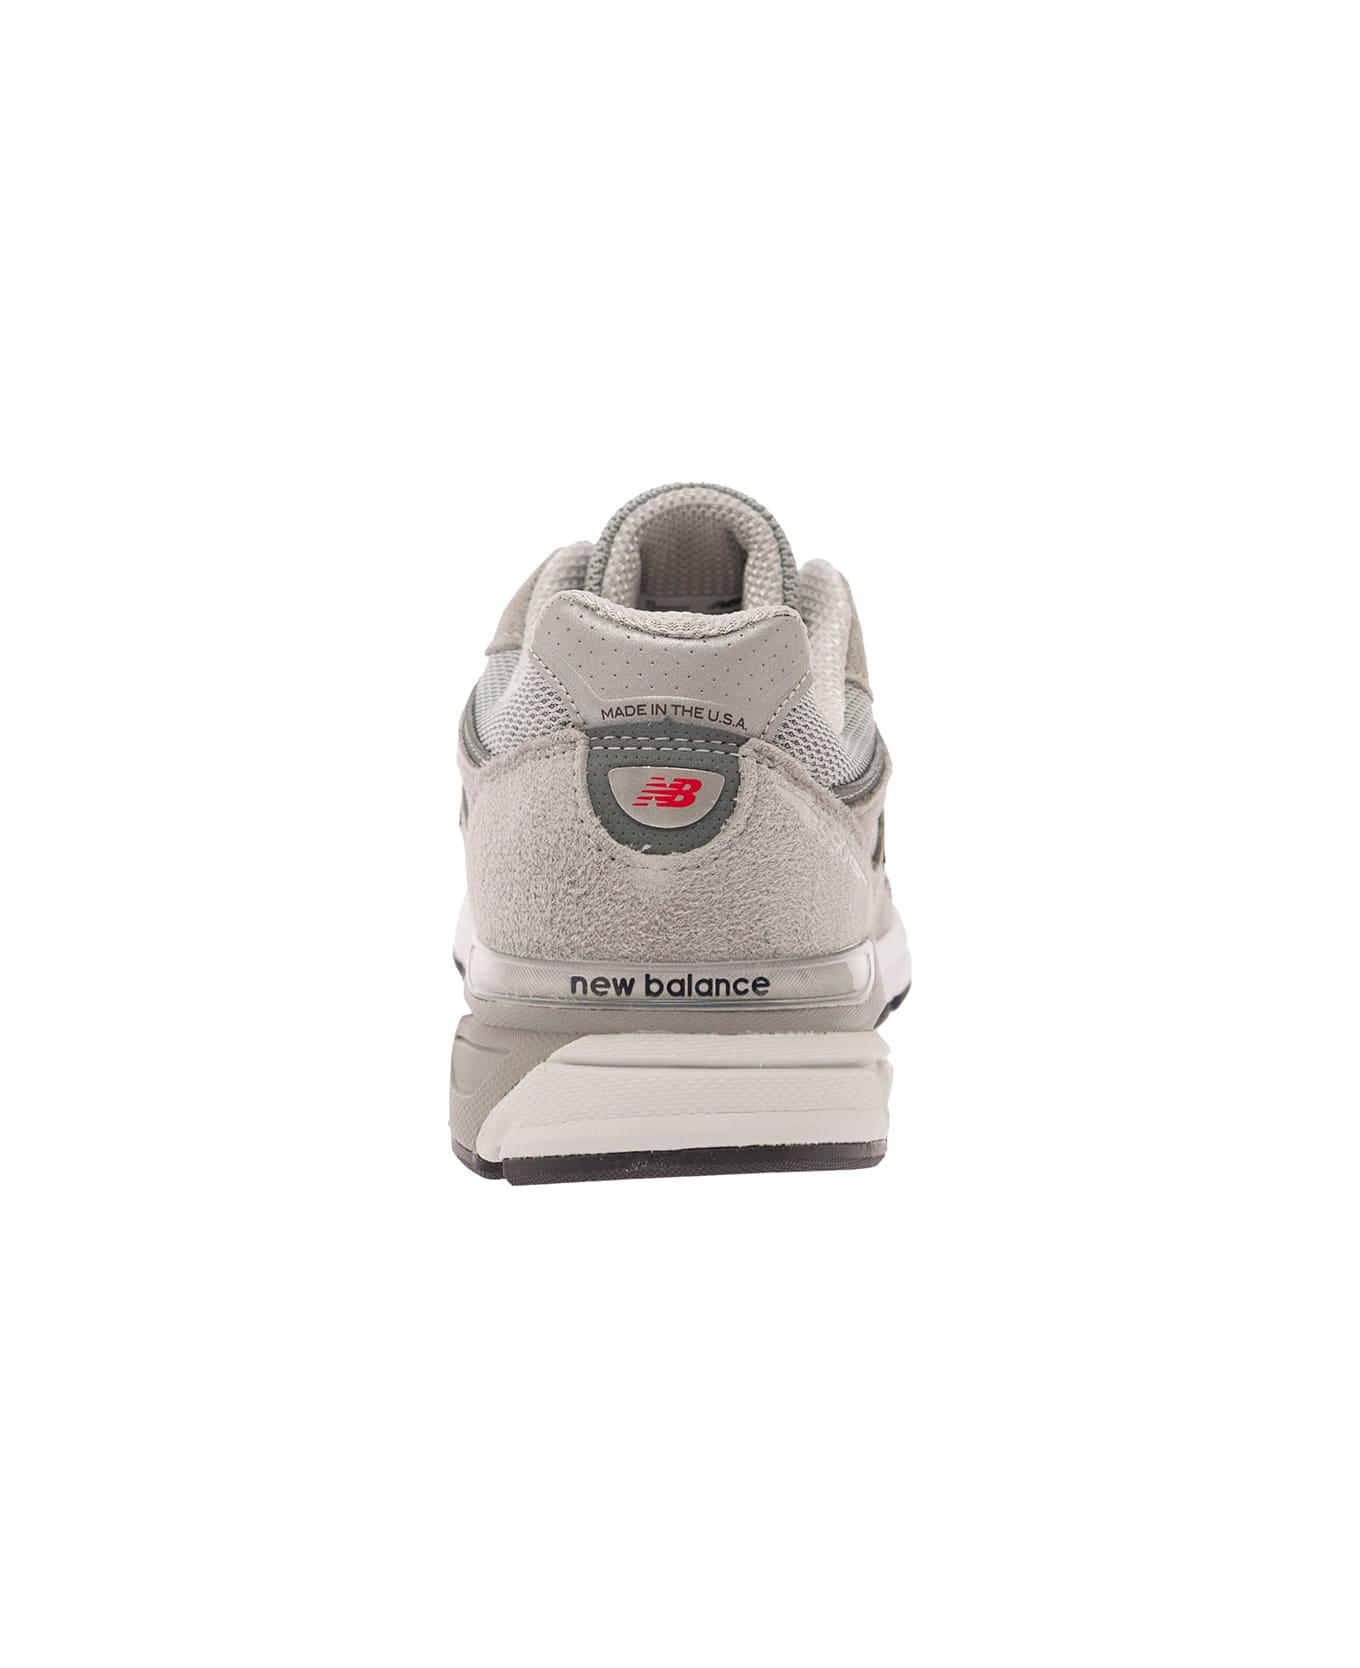 New Balance '990' Grey Low Top Sneakers With Logo Detail In Leather And Suede Man - Grey